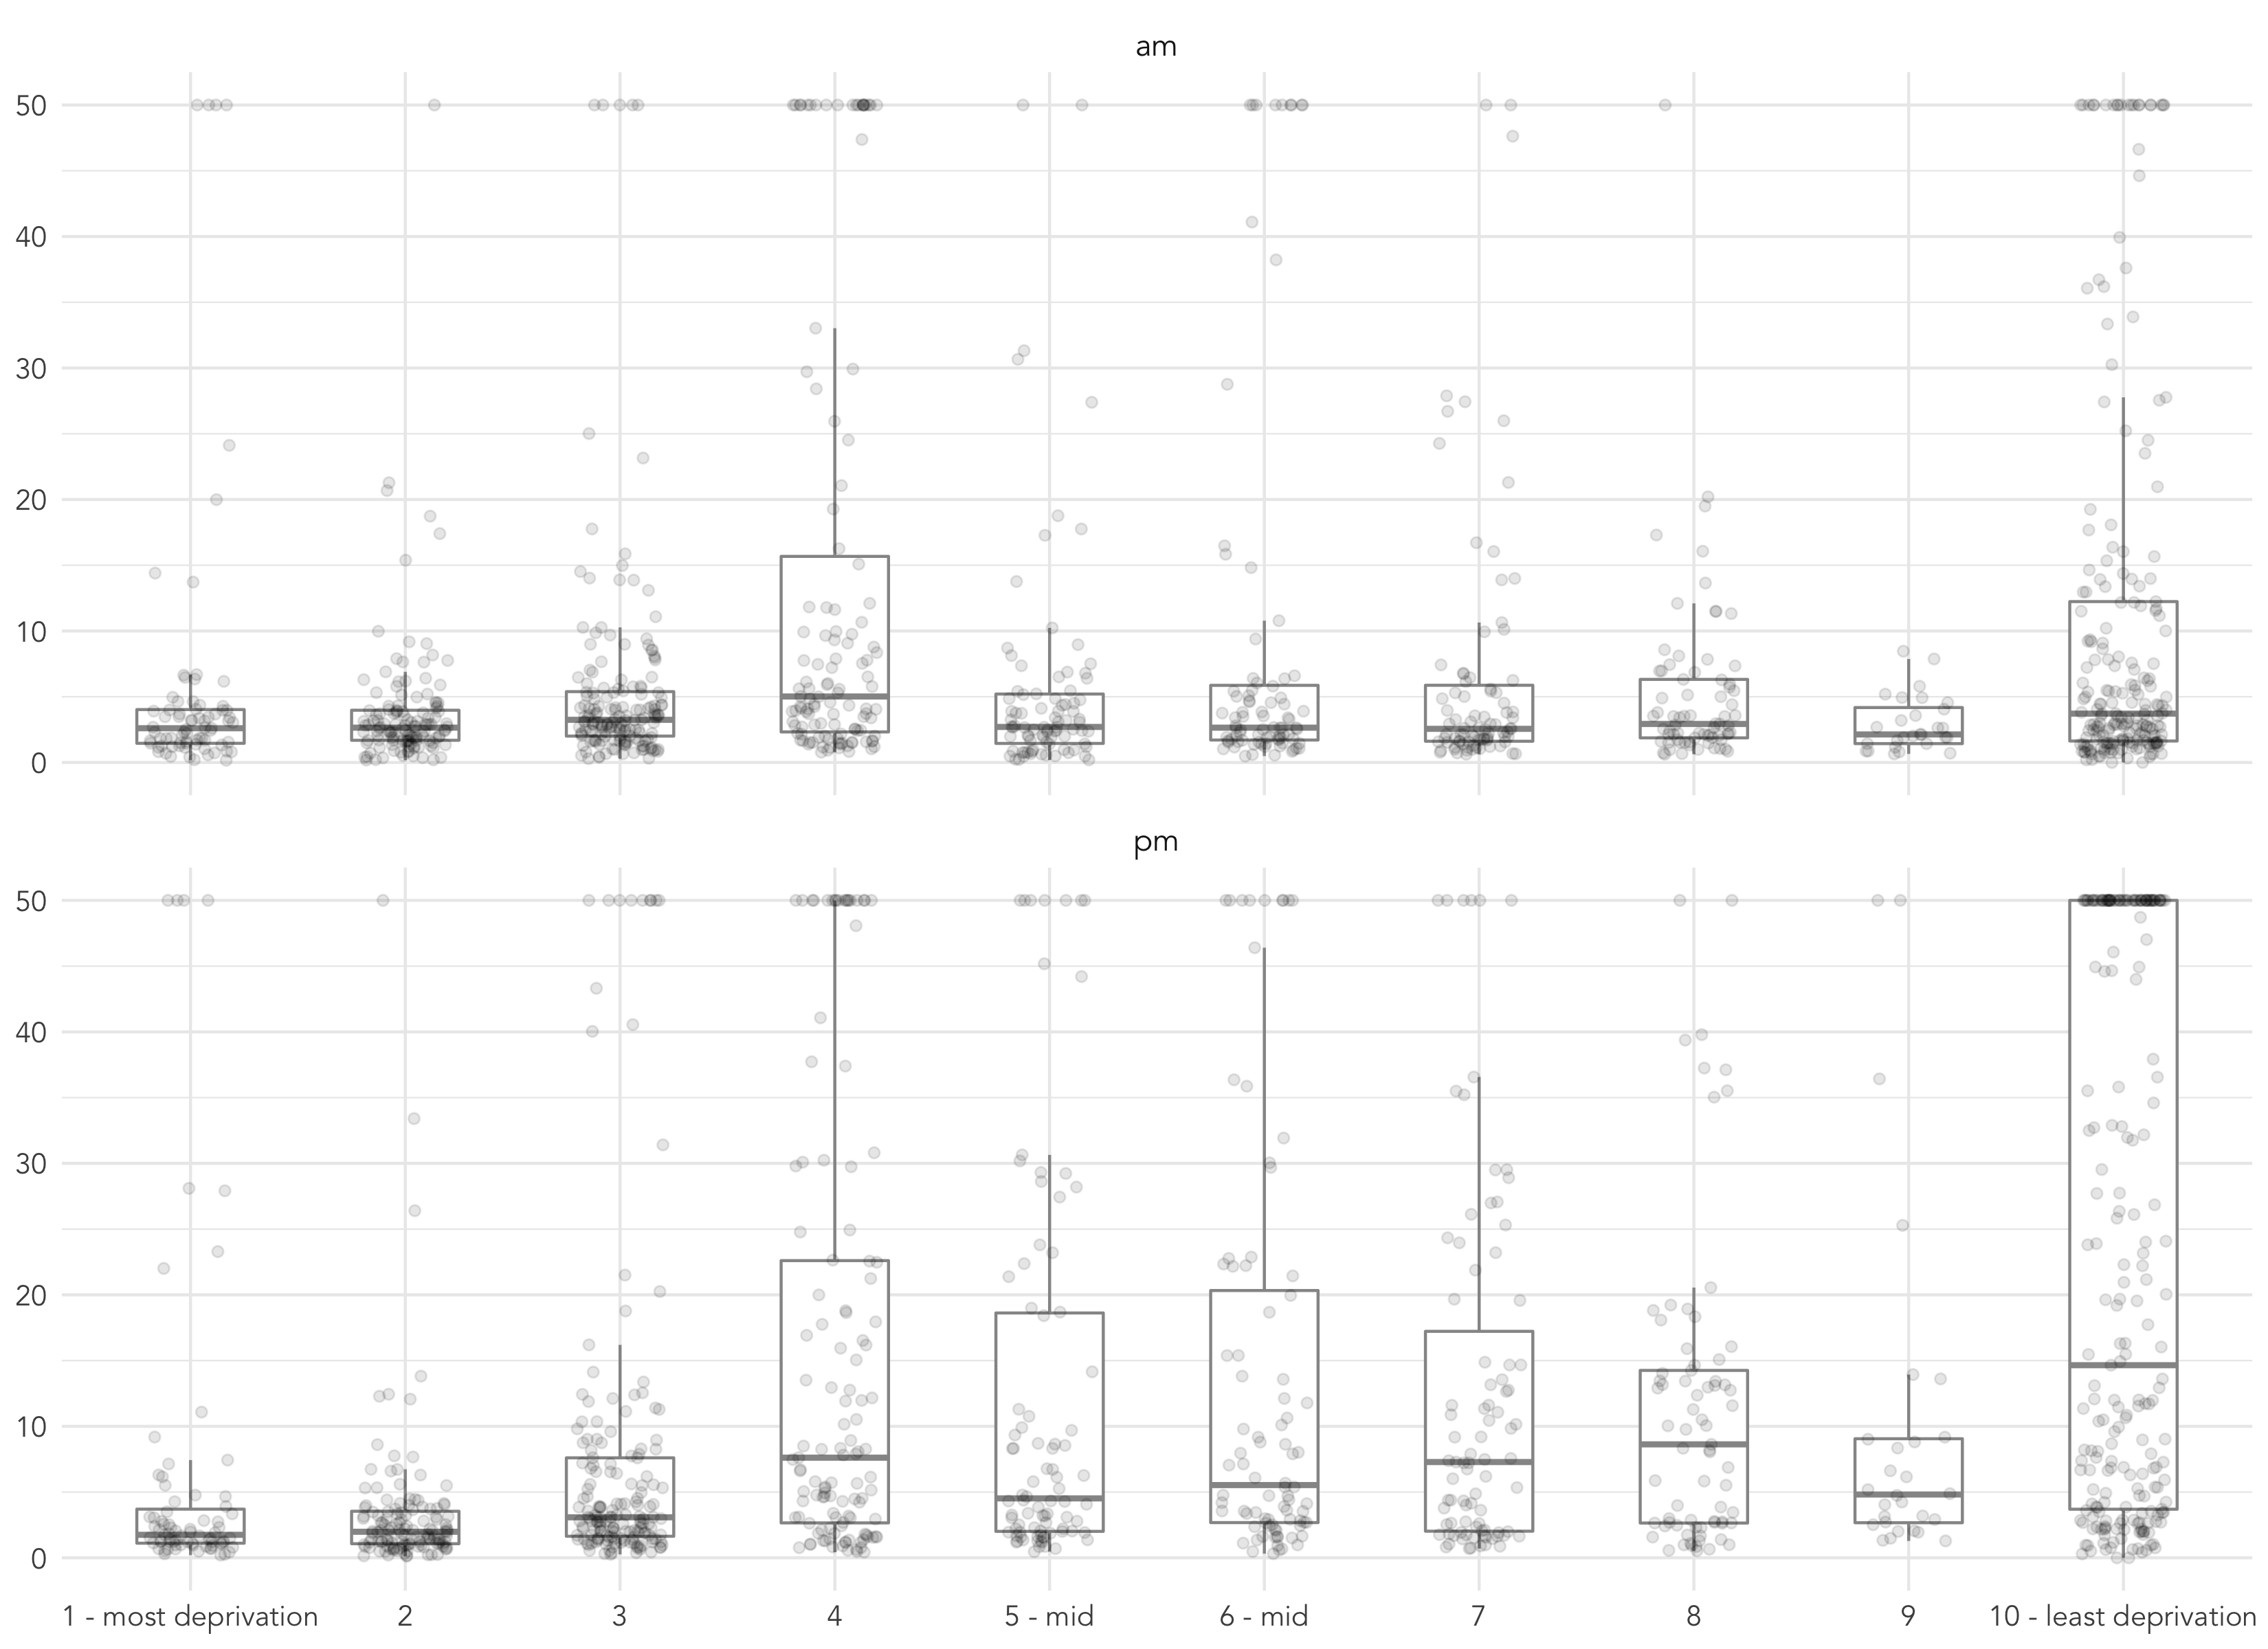 Boxplot showing docking station usage (y axis) by income decile of nearest residential areas (x axis, ordered left-to-right by high-to-low income domain of the Index of Multiple Deprivation) during the morning (top panel, 06:00 to 10:00) and afternoon (bottom panel, 16:00 to 20:00) peaks. In order to clean out extreme values at hub stations, average trip counts are censored to 50